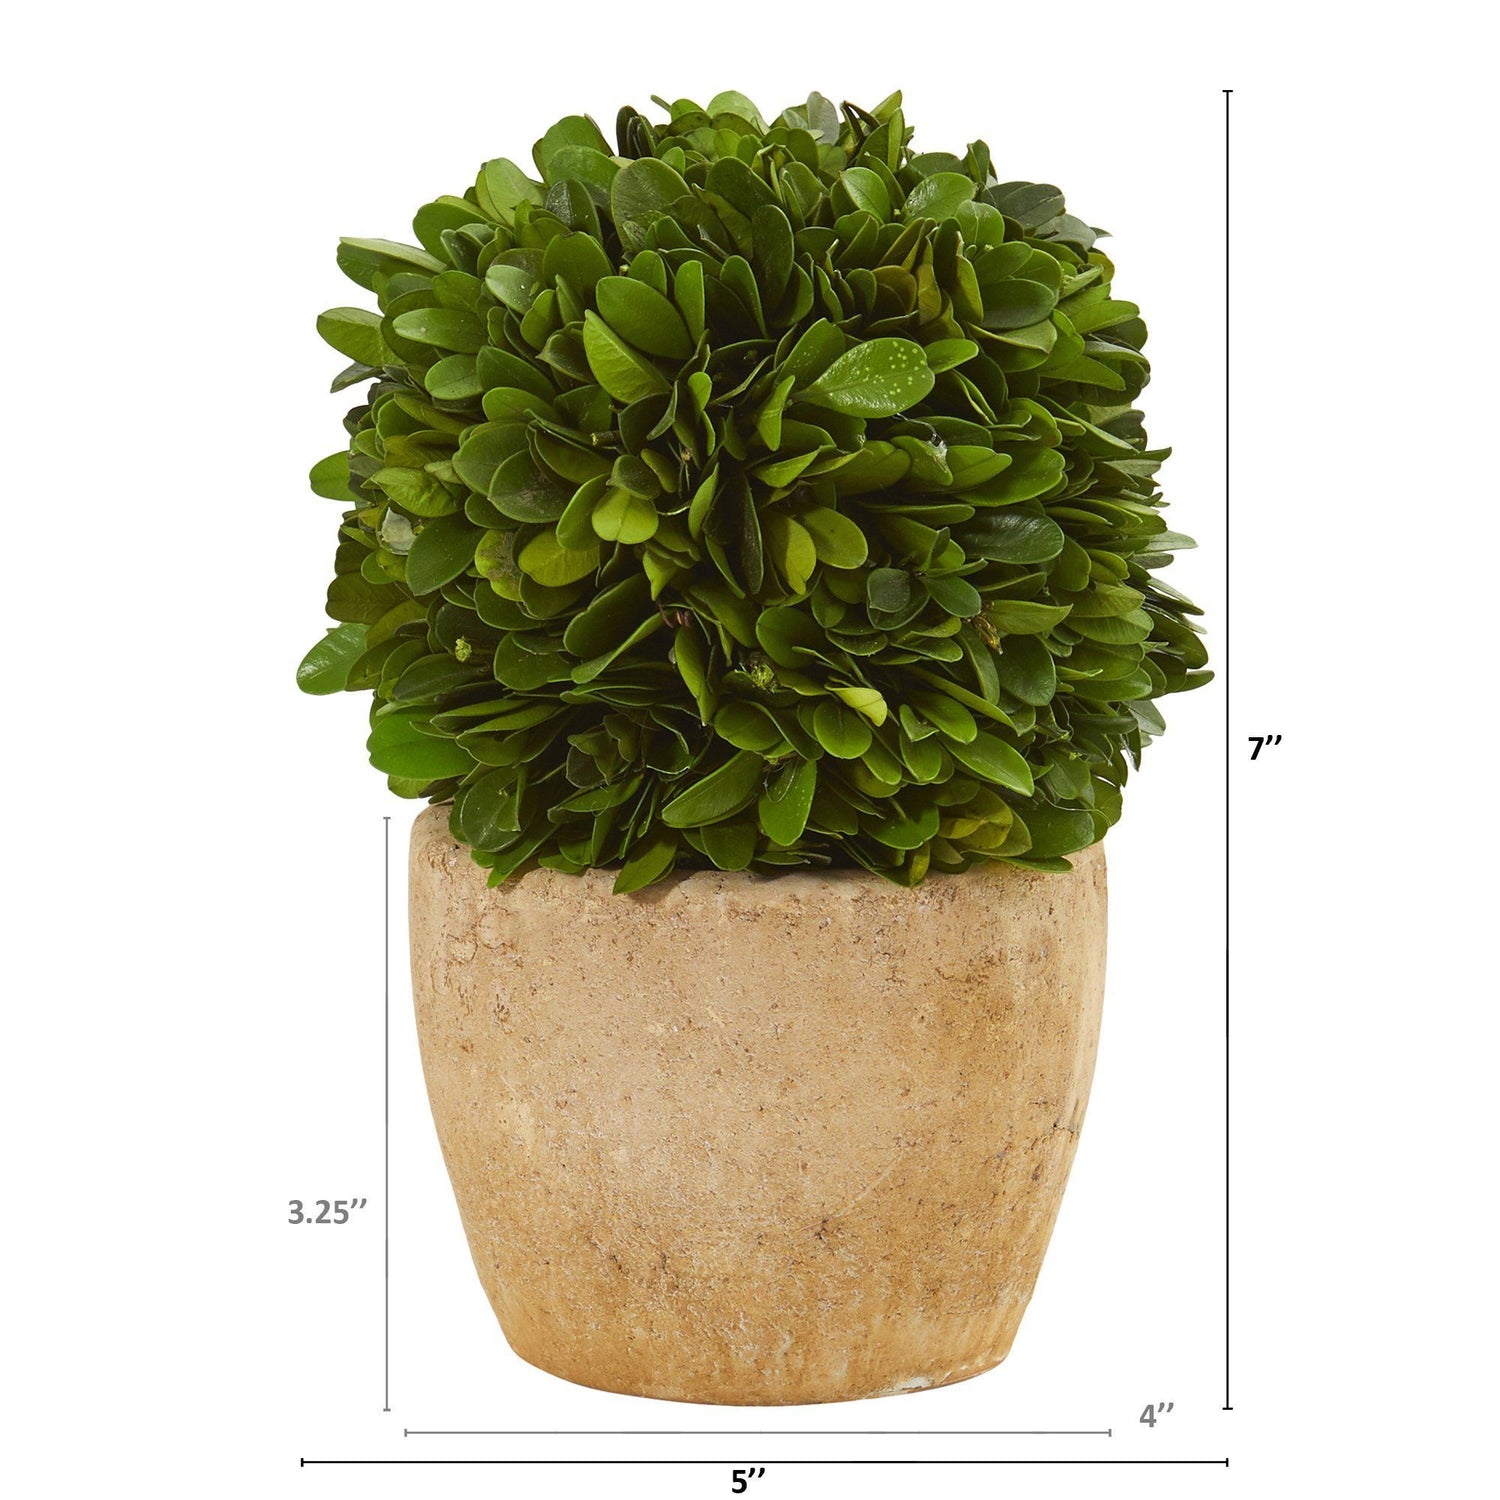 7” Boxwood Ball Preserved Plant in Decorative Planter (Set of 2)